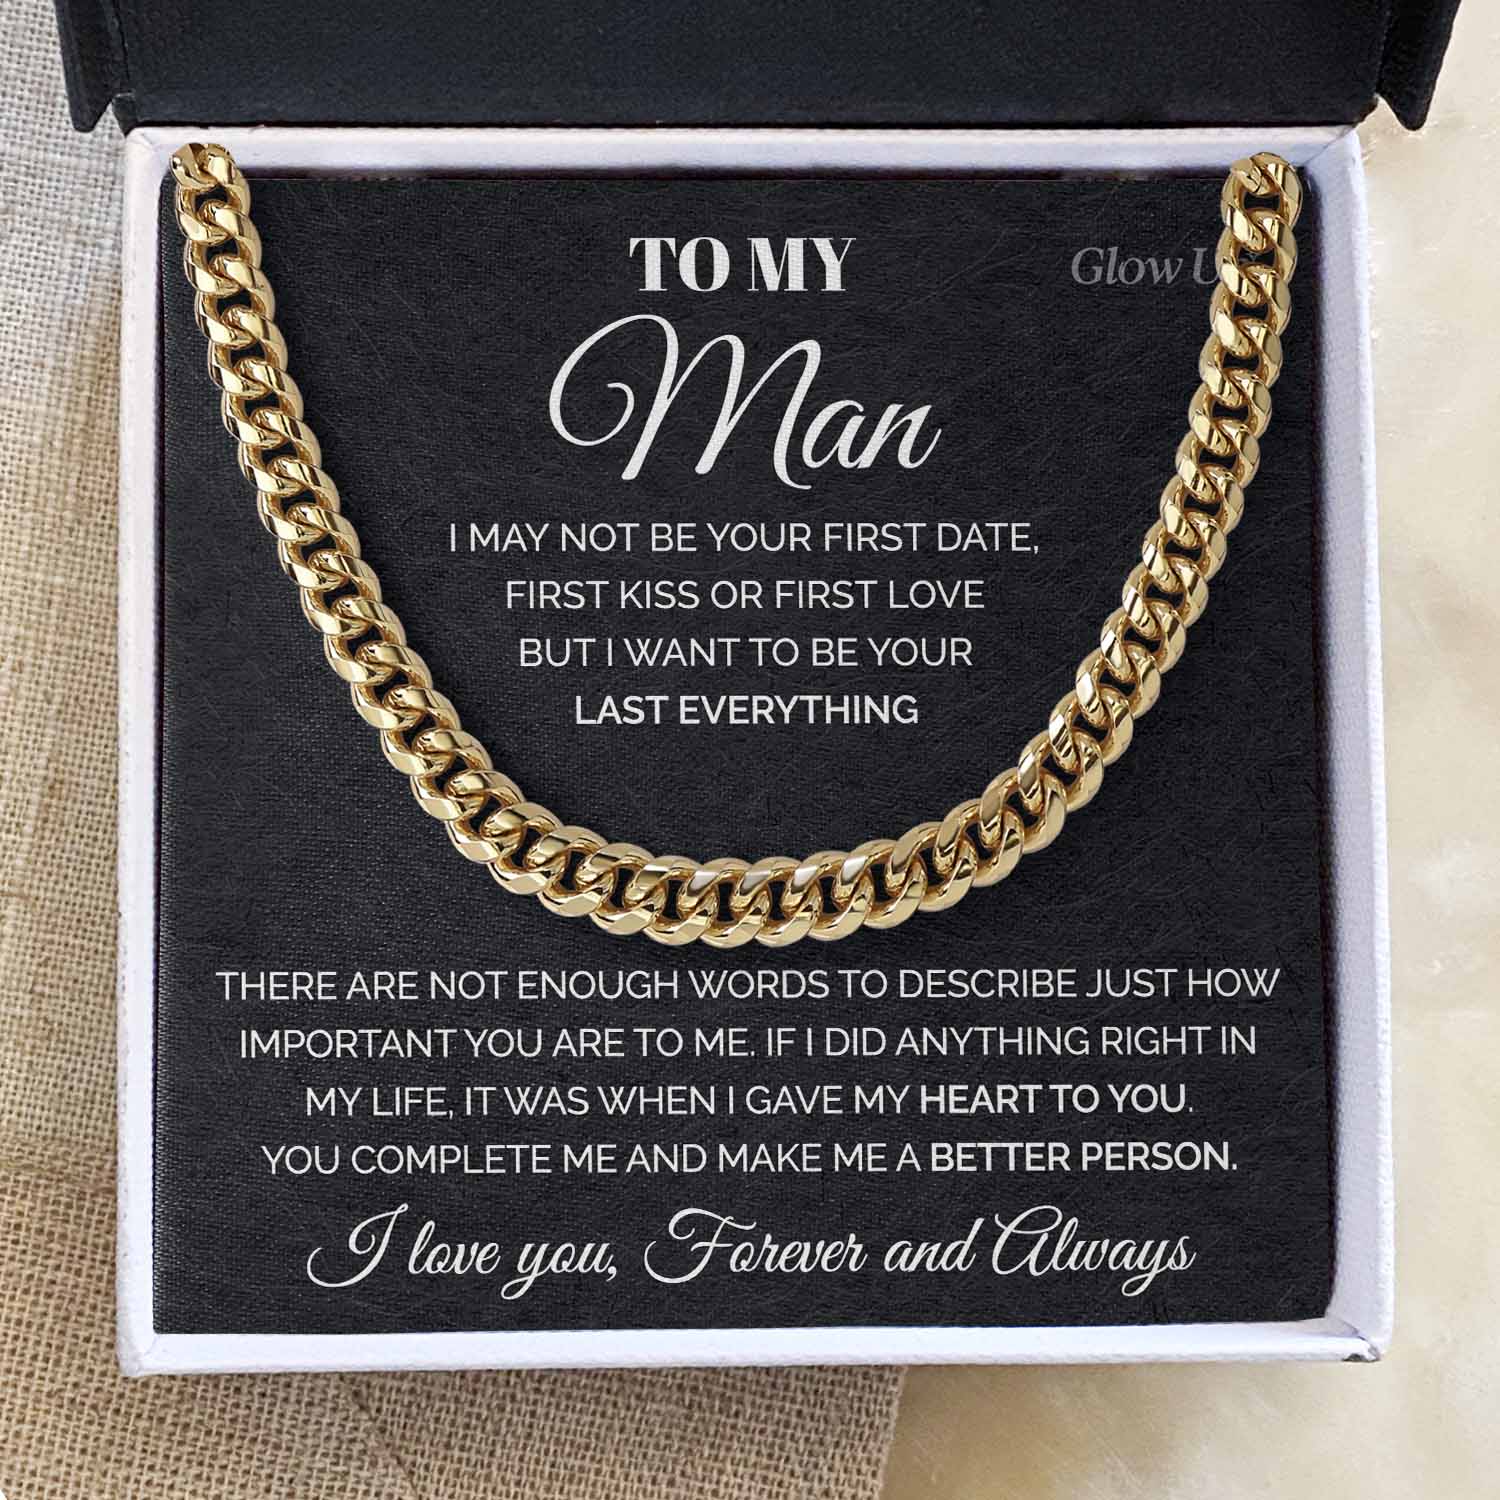 Glow Up Cuban Link Chain 18k Gold Over Stainless Steel / Two Toned Box To my Man - Cuban Link Chain - I may not be your First date